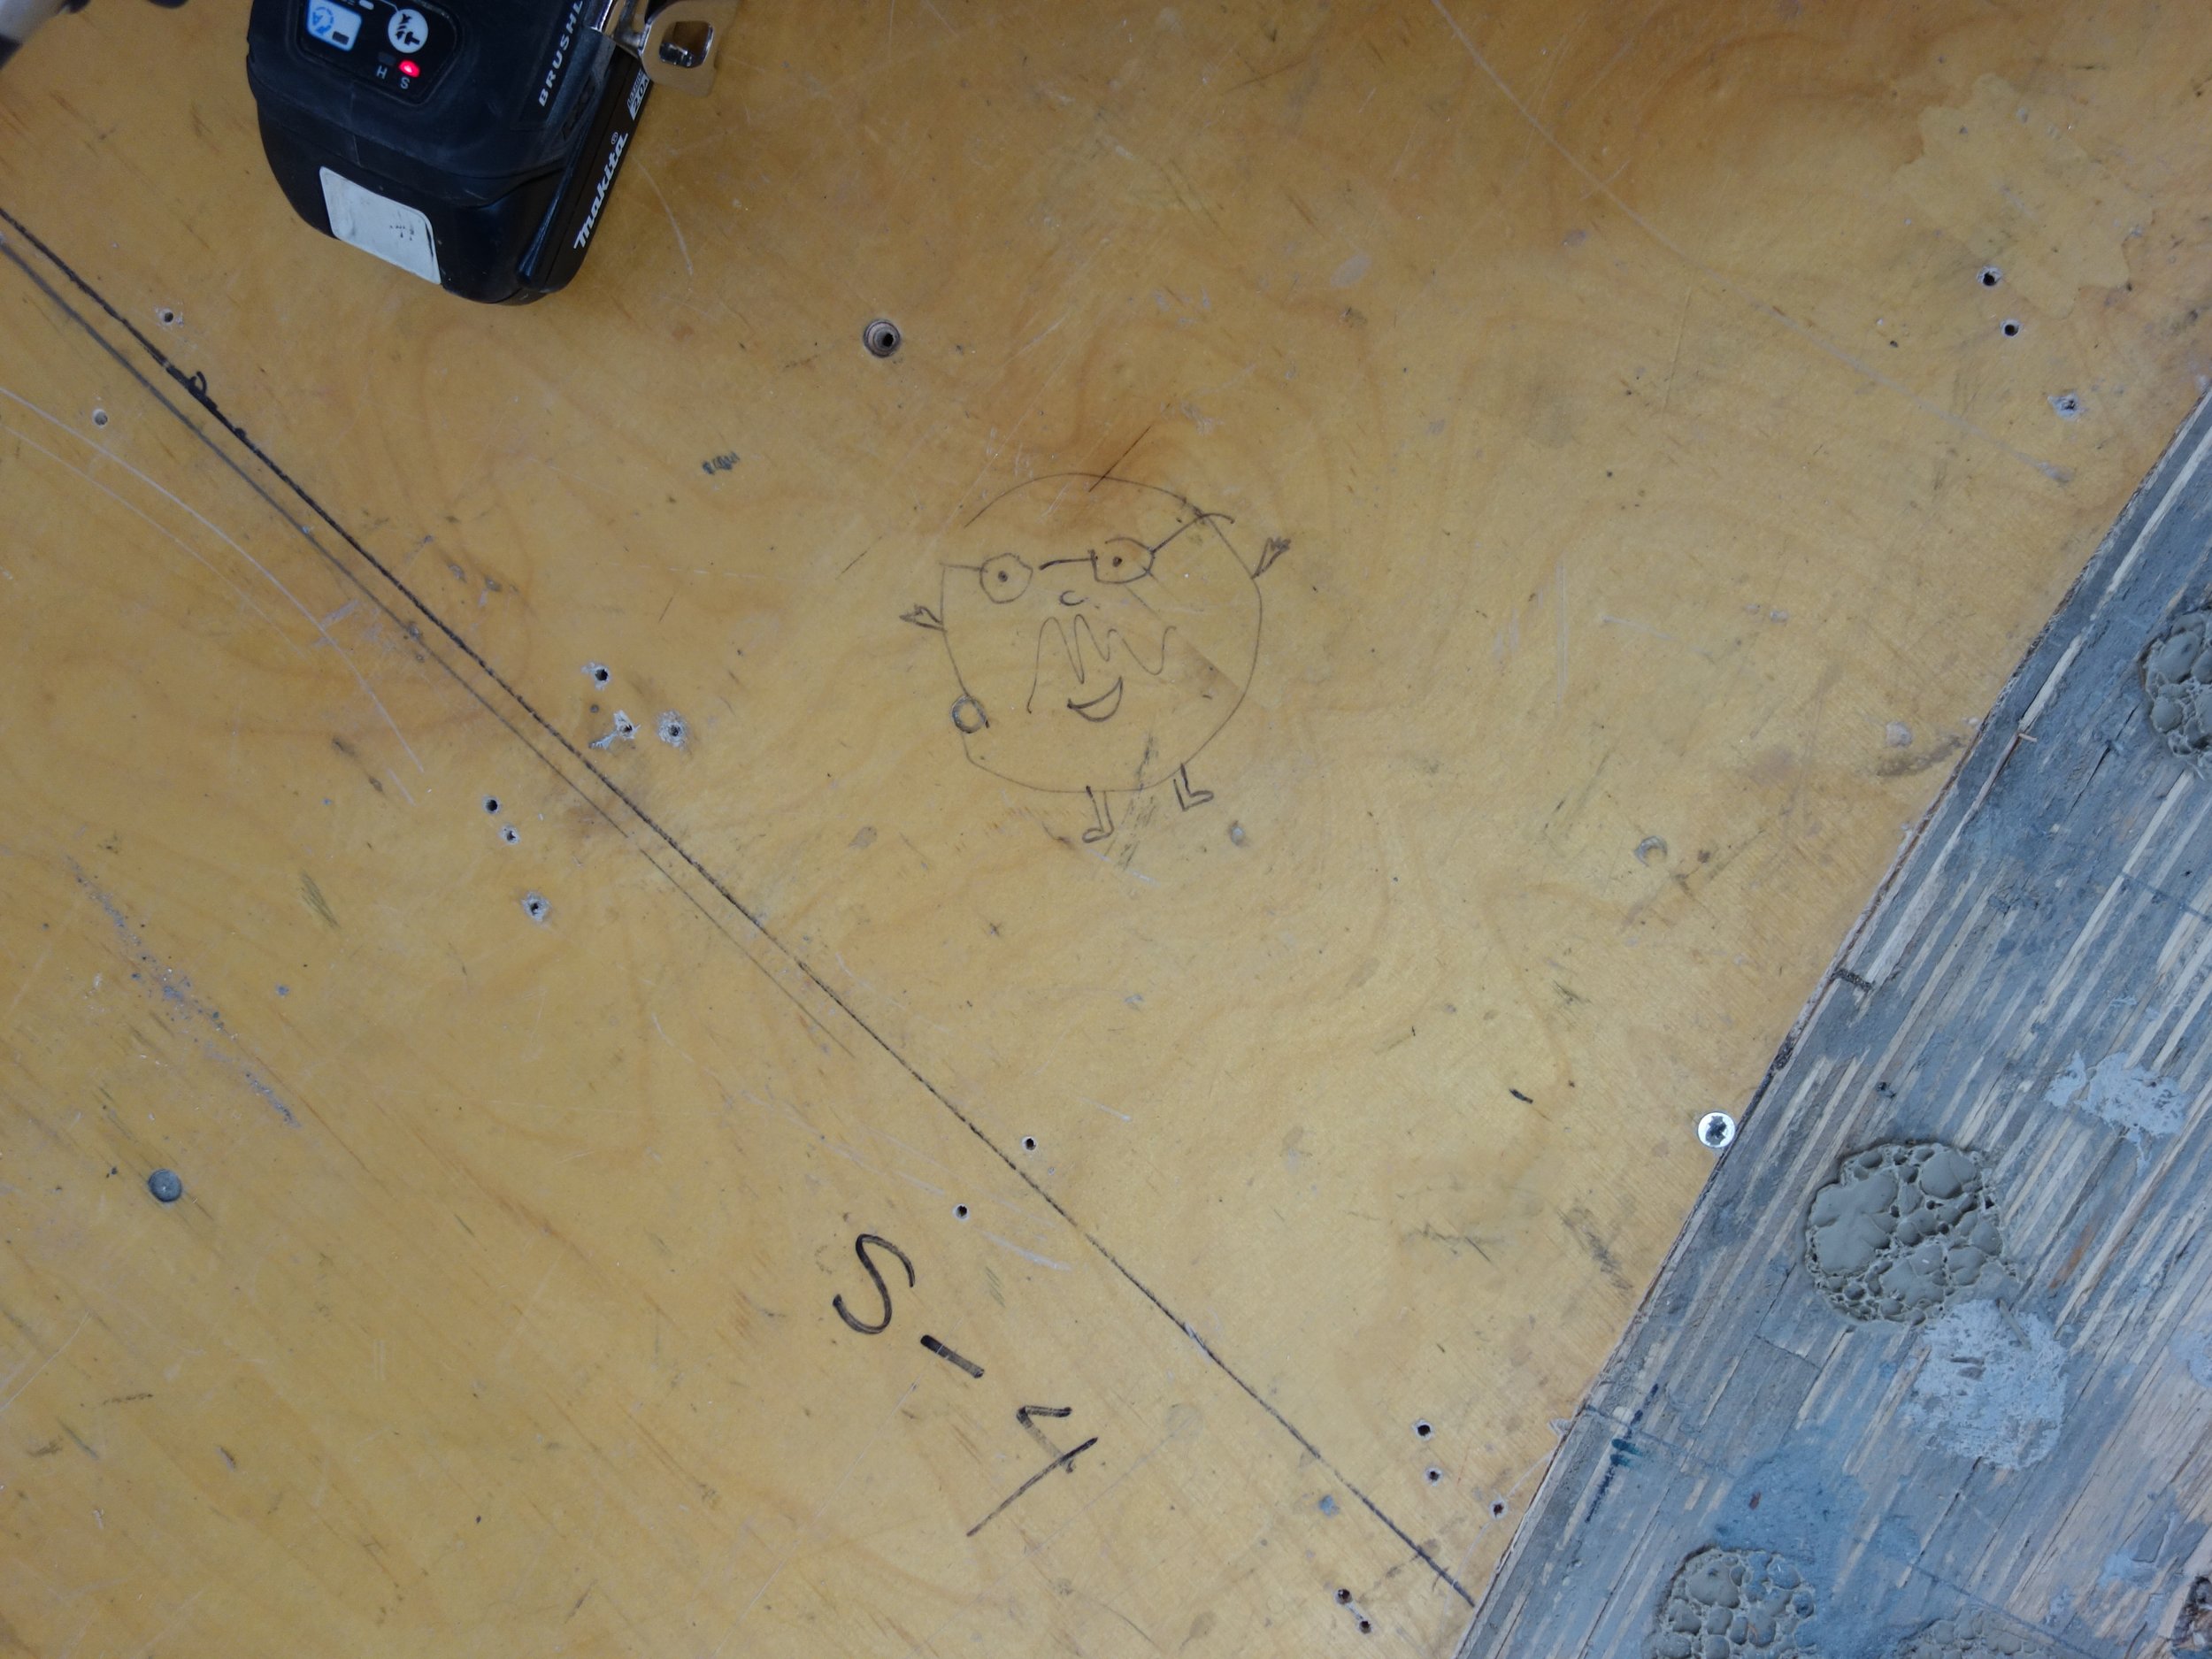  A little doodle on the subfloor to be revealed when the pool gets disassembled…someday! 